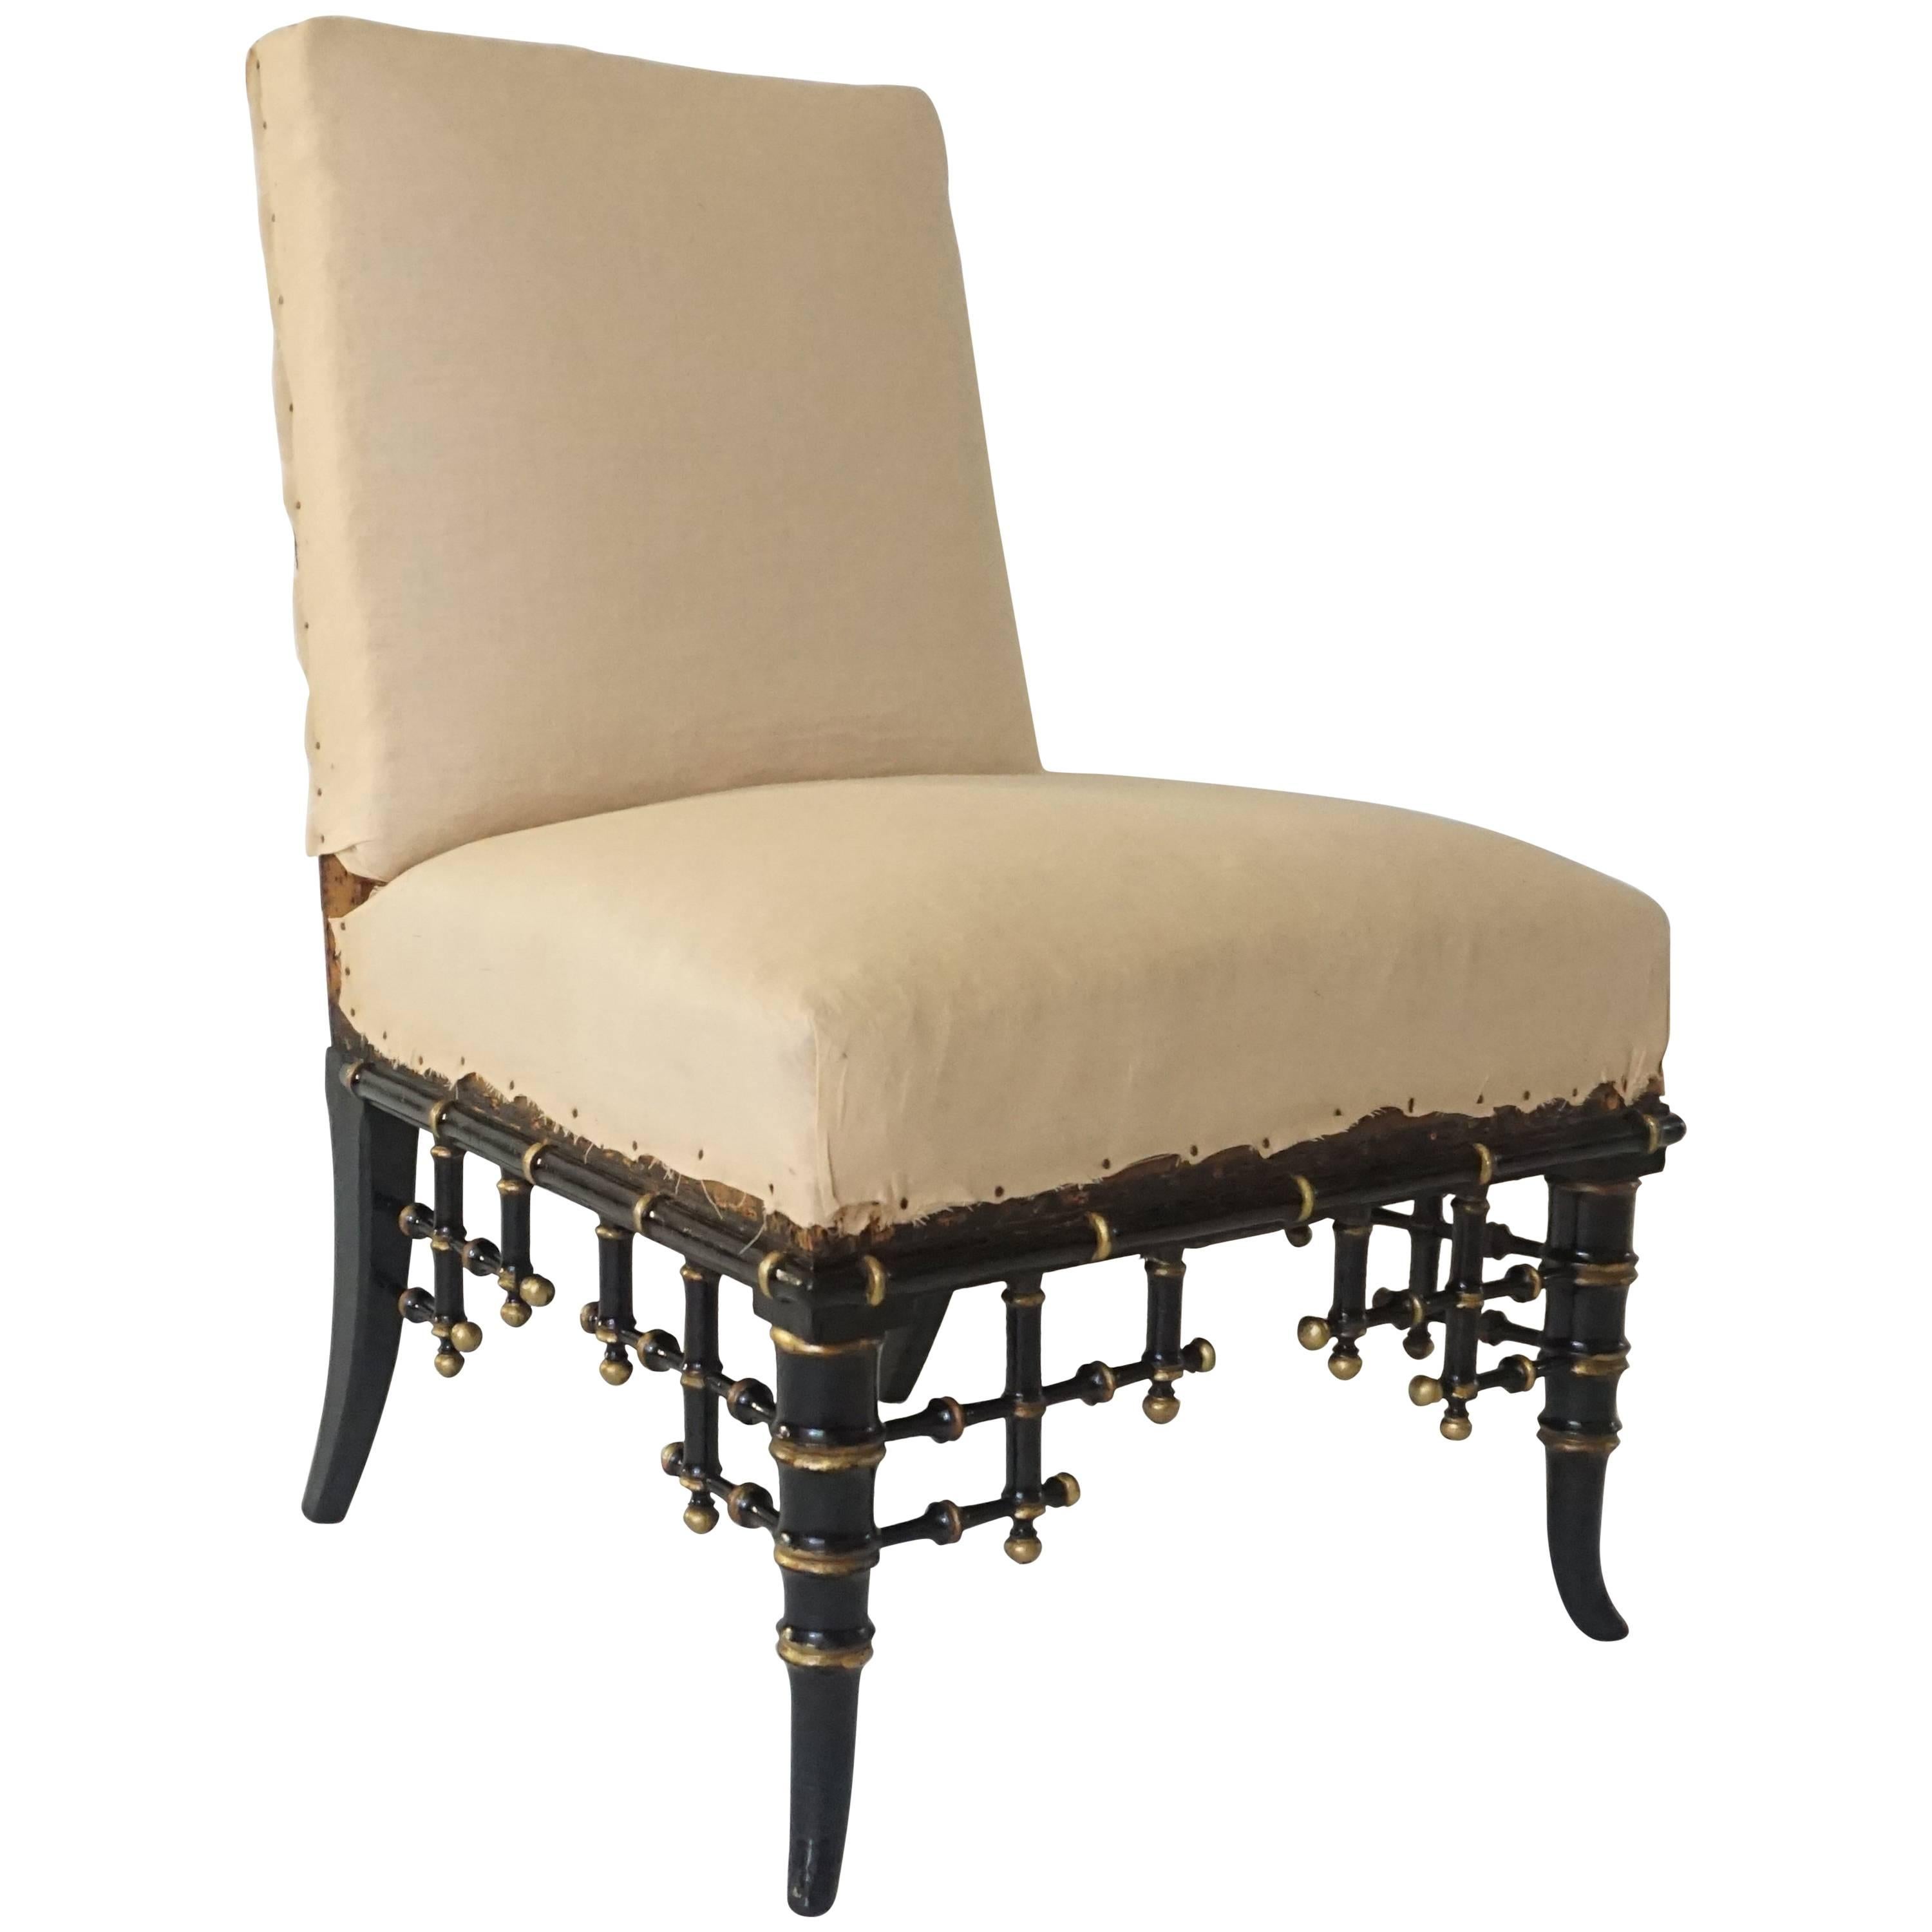 French Ebonized and Parcel-Gilt Faux Bamboo Slipper Chair